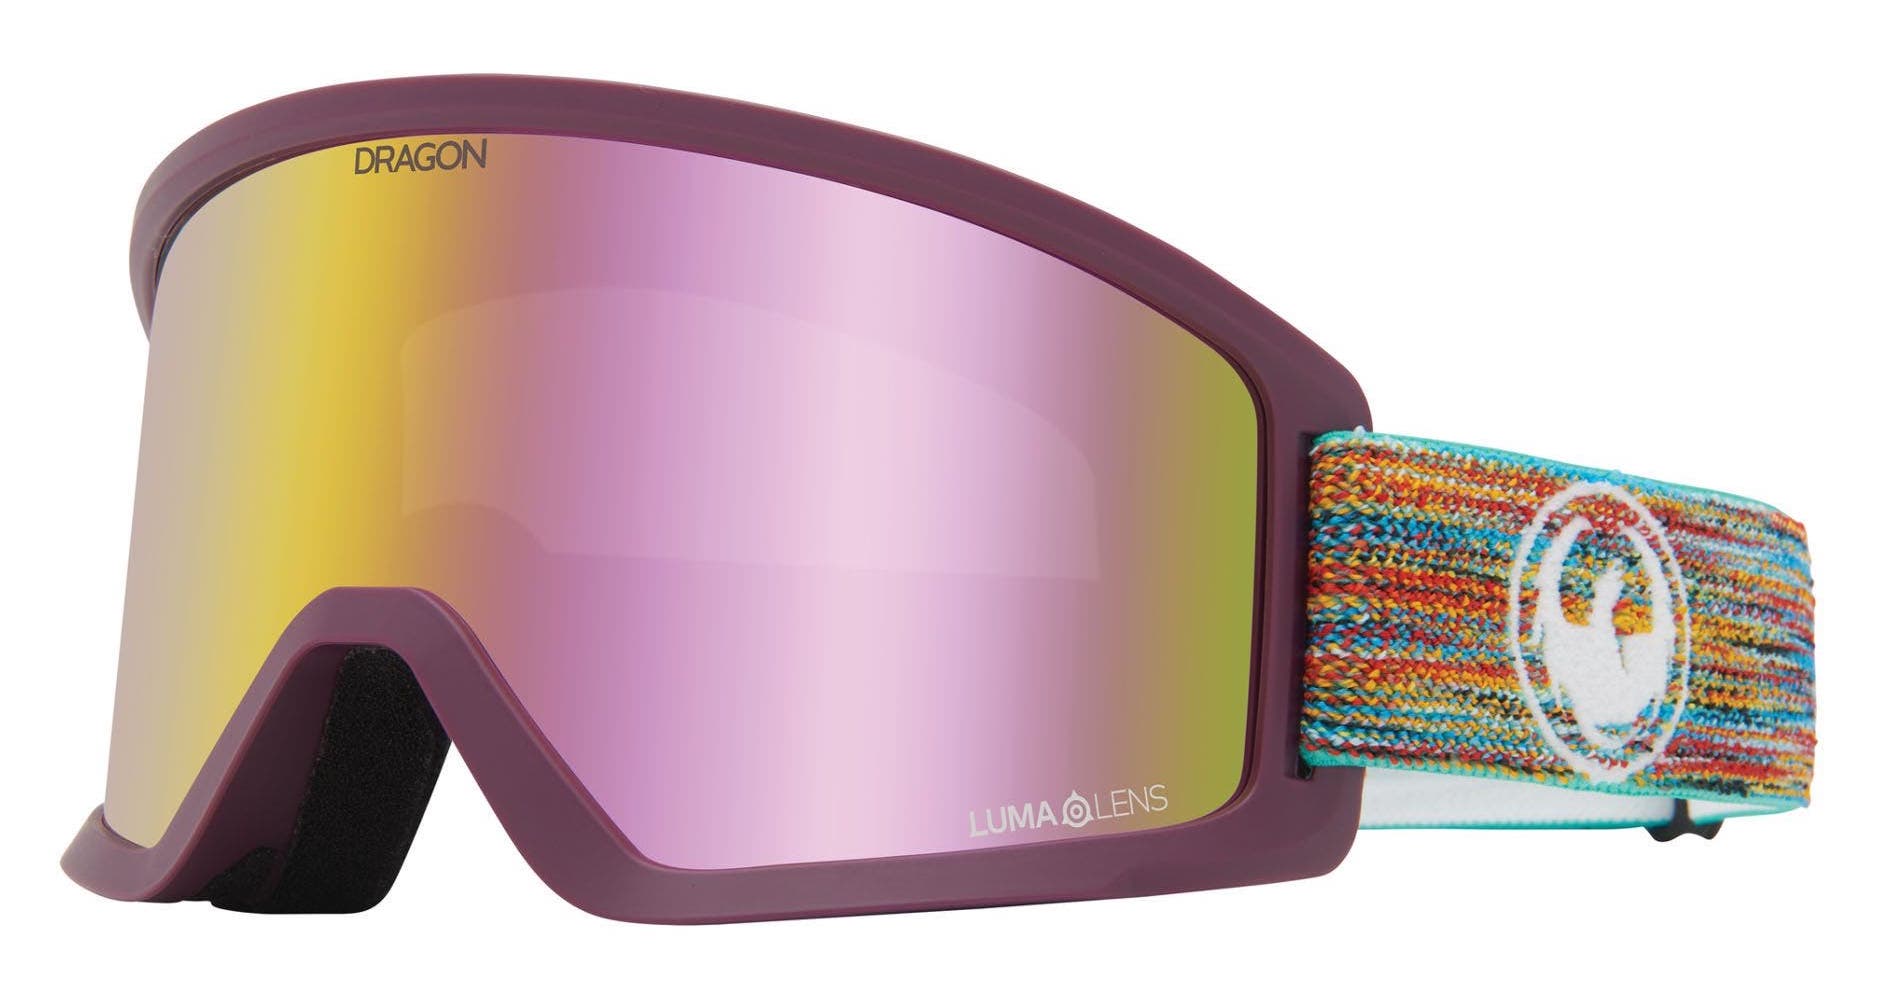 Dragon DX3 OTG snow goggle in striped multi-color strap with pink lumalens.